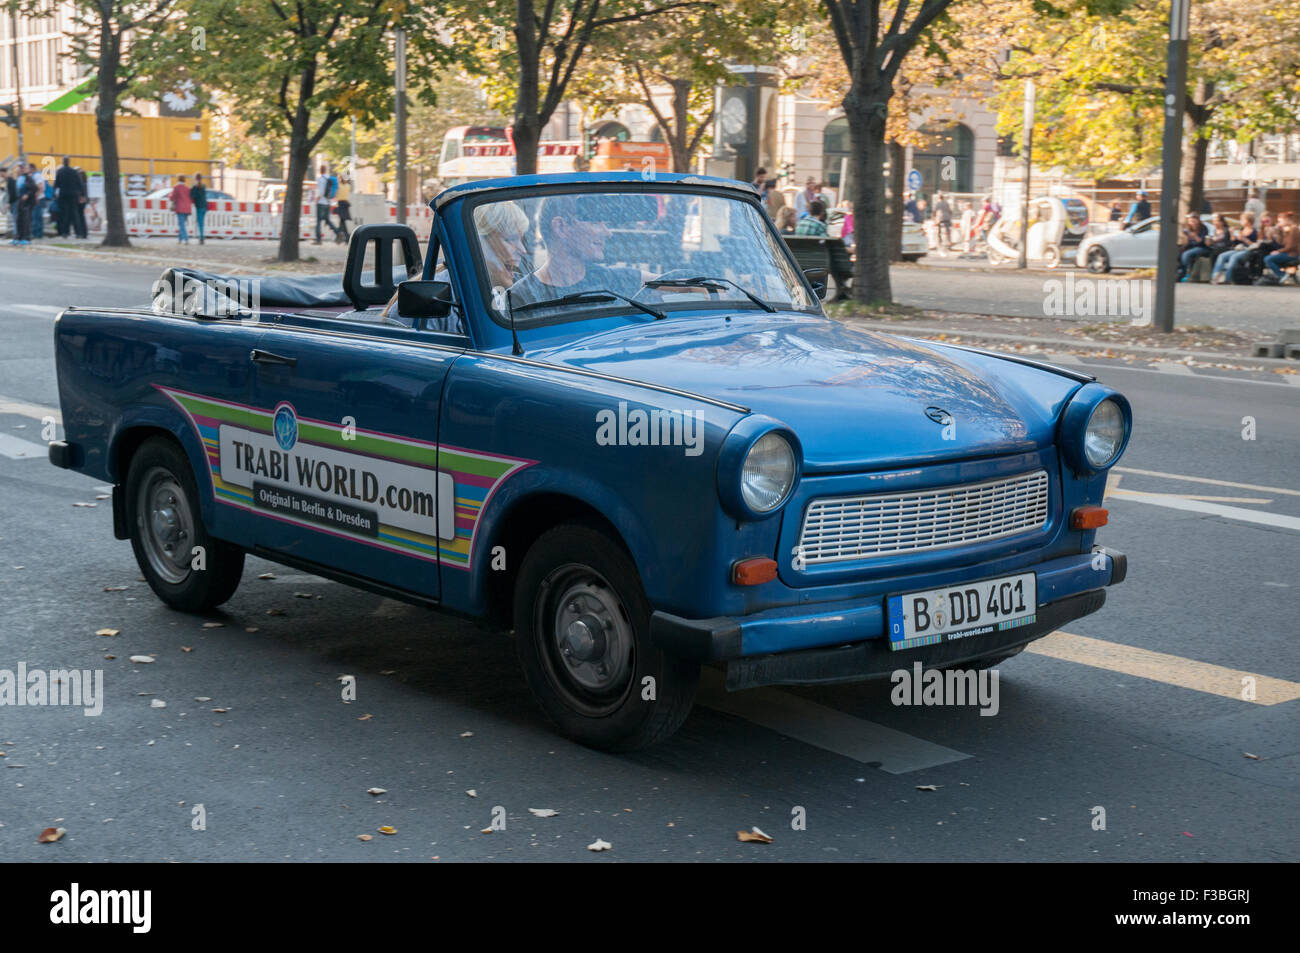 East German Trabant car in use for city tours of modern-day Berlin Stock Photo